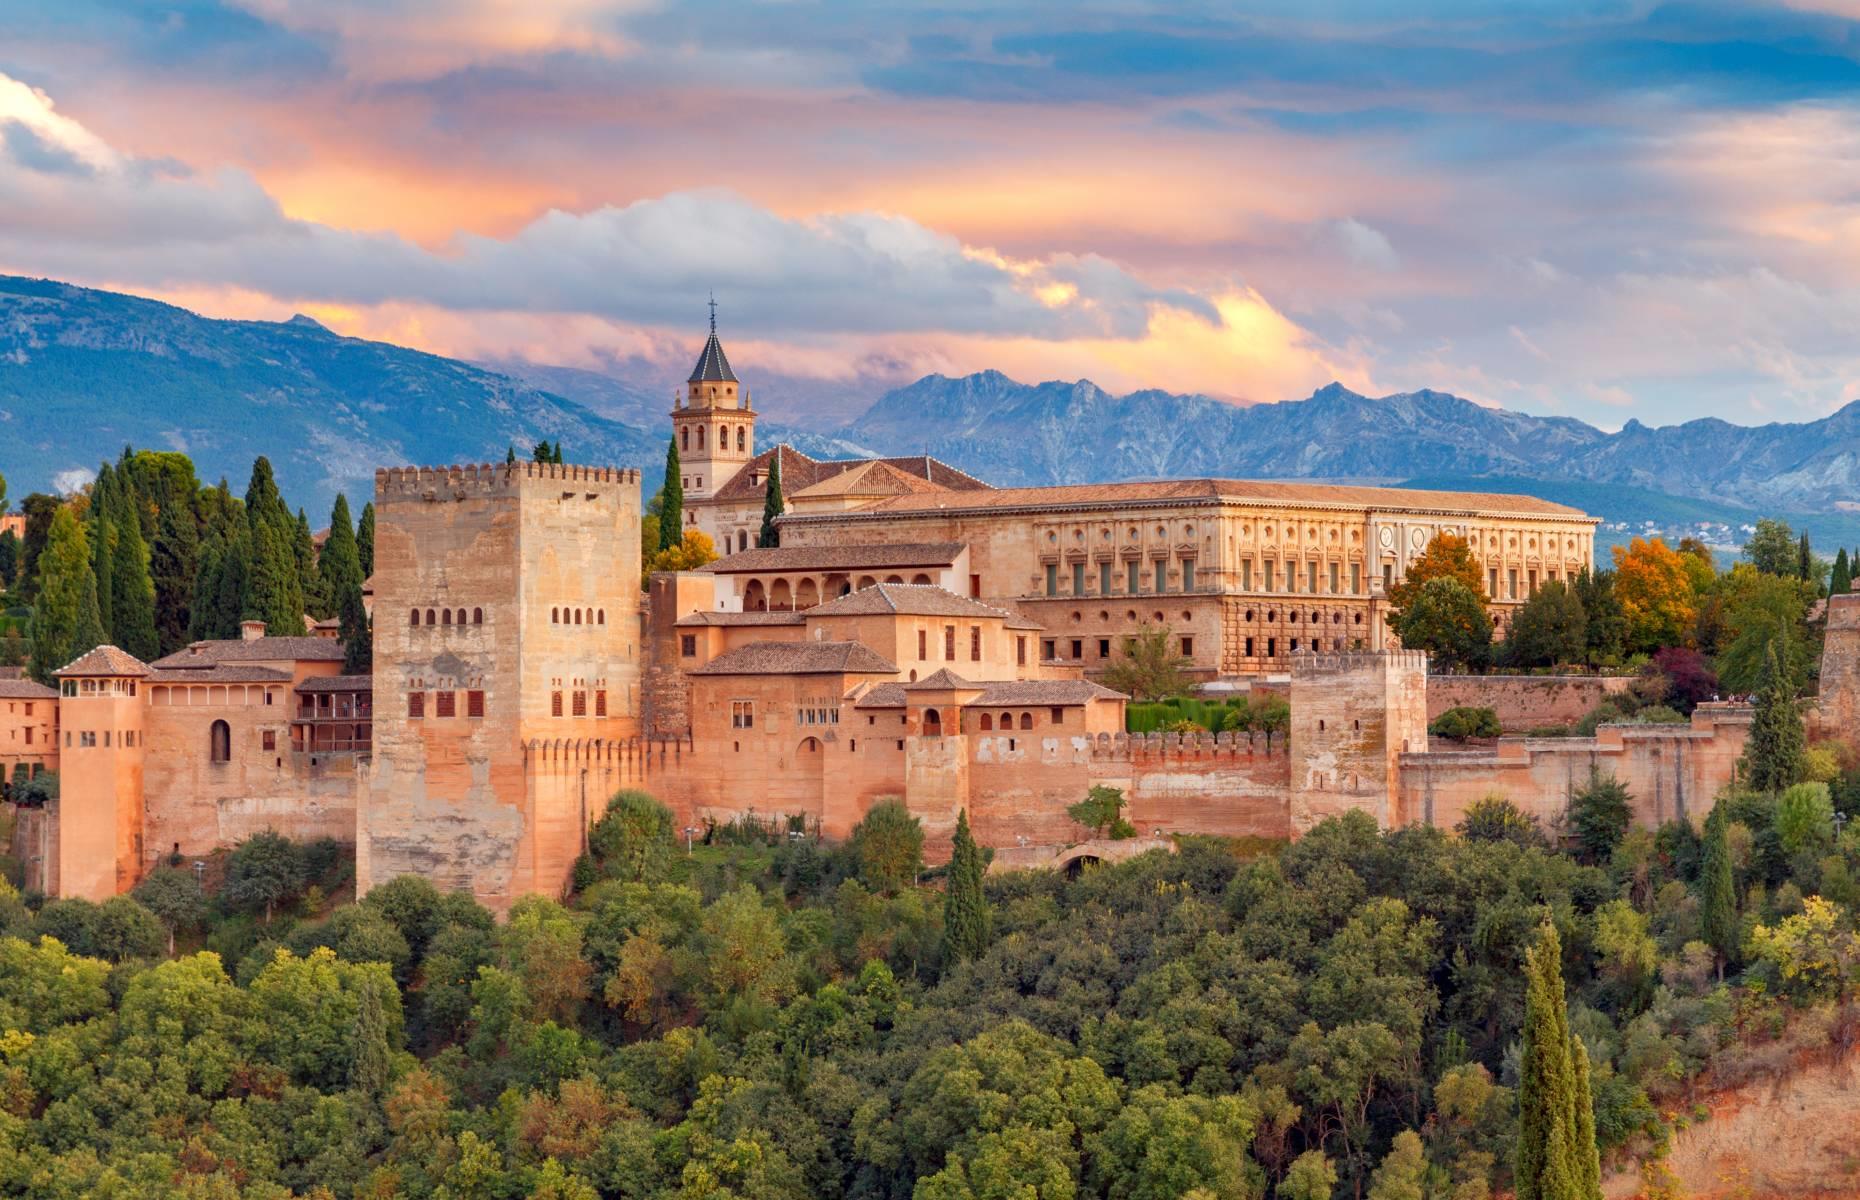 <p>Built by the Islamic monarchs of Andalucia on a leafy plateau above the city of Granada, the majestic Alhambra is a sight to behold. This fortified palace was primarily constructed between 1238 and 1358, though several sections were reworked when Spain reverted to Christianity in the 16th century.</p>  <p>But the Arabesque influence still looms large in the Alhambra's architectural details and decor, like its elaborate archways, painted tiles, and reflecting pools.</p>